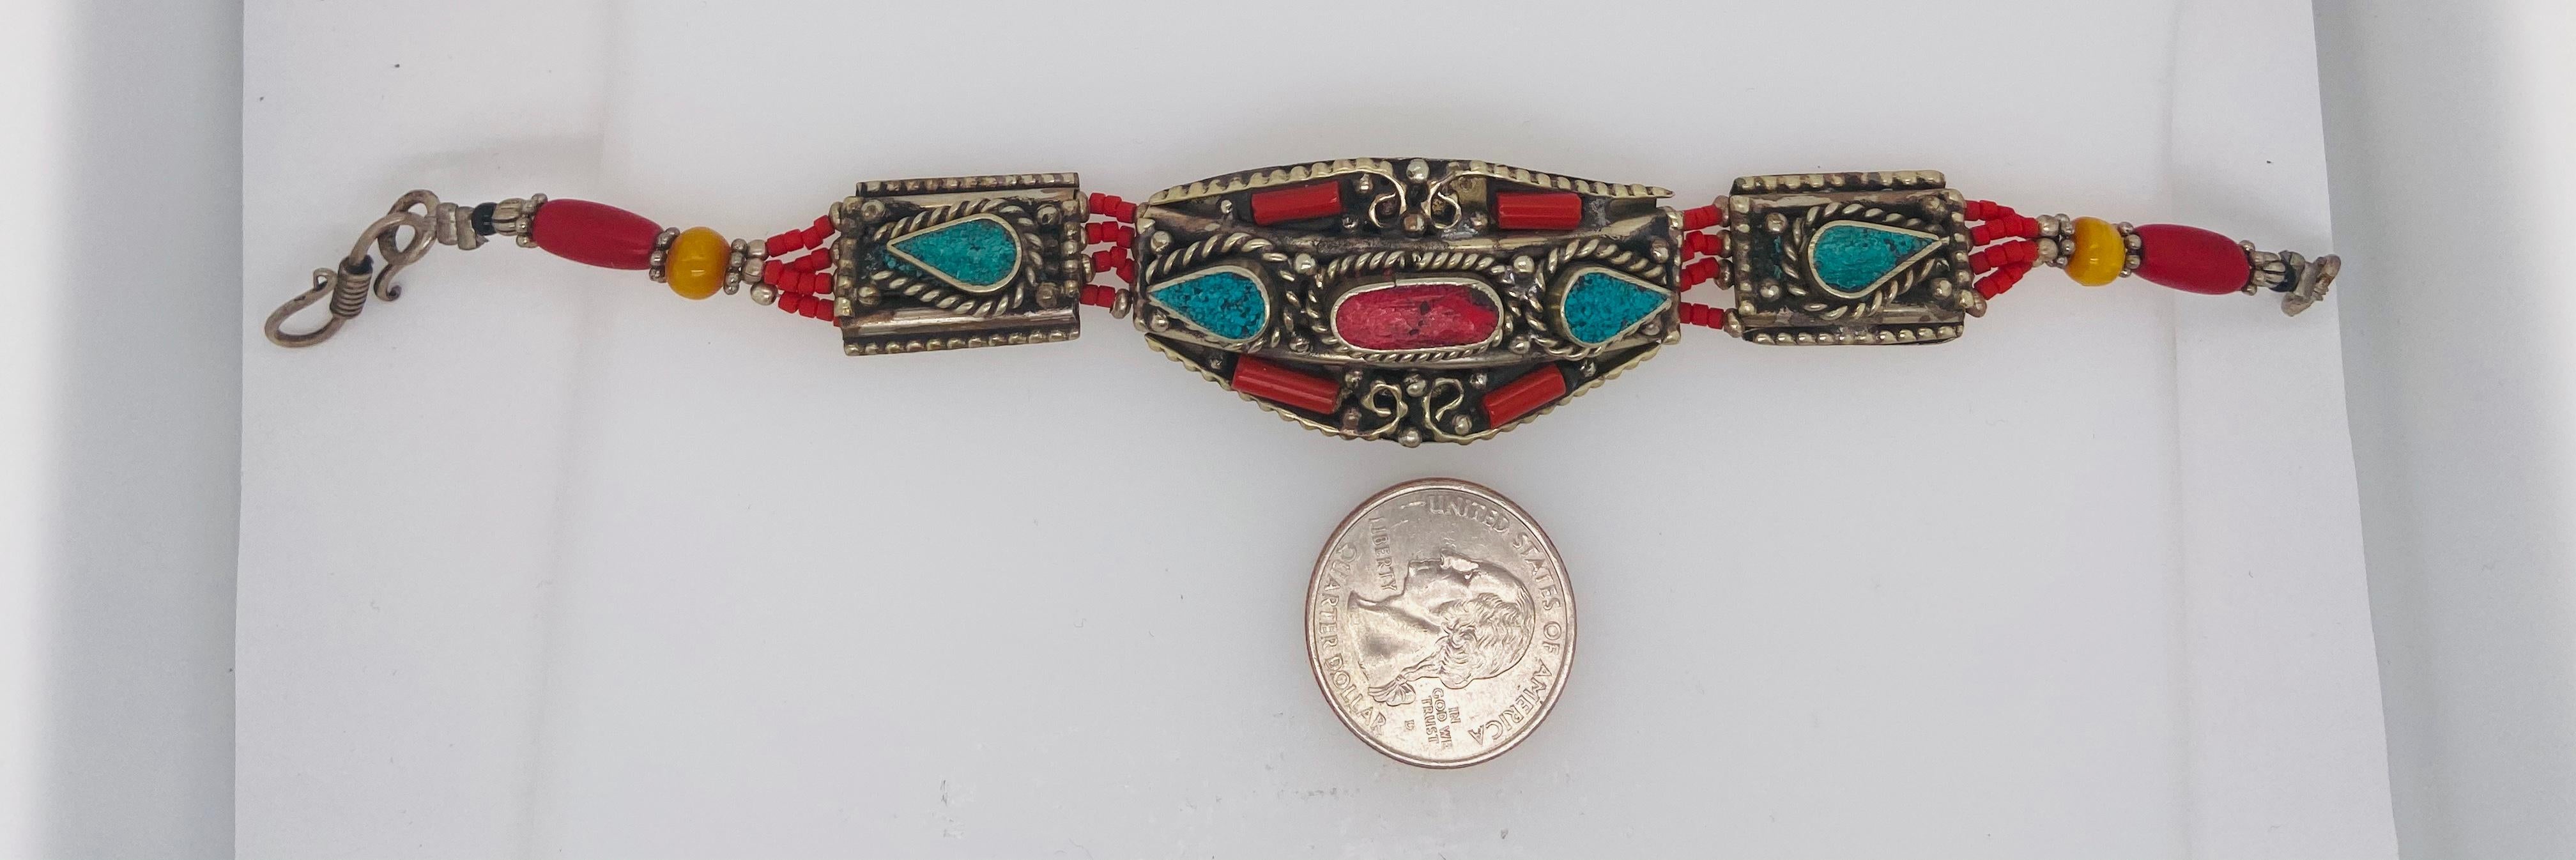 Midcentury Moroccan Tribal Silver Bracelet with Turquoise and Red Stones For Sale 8